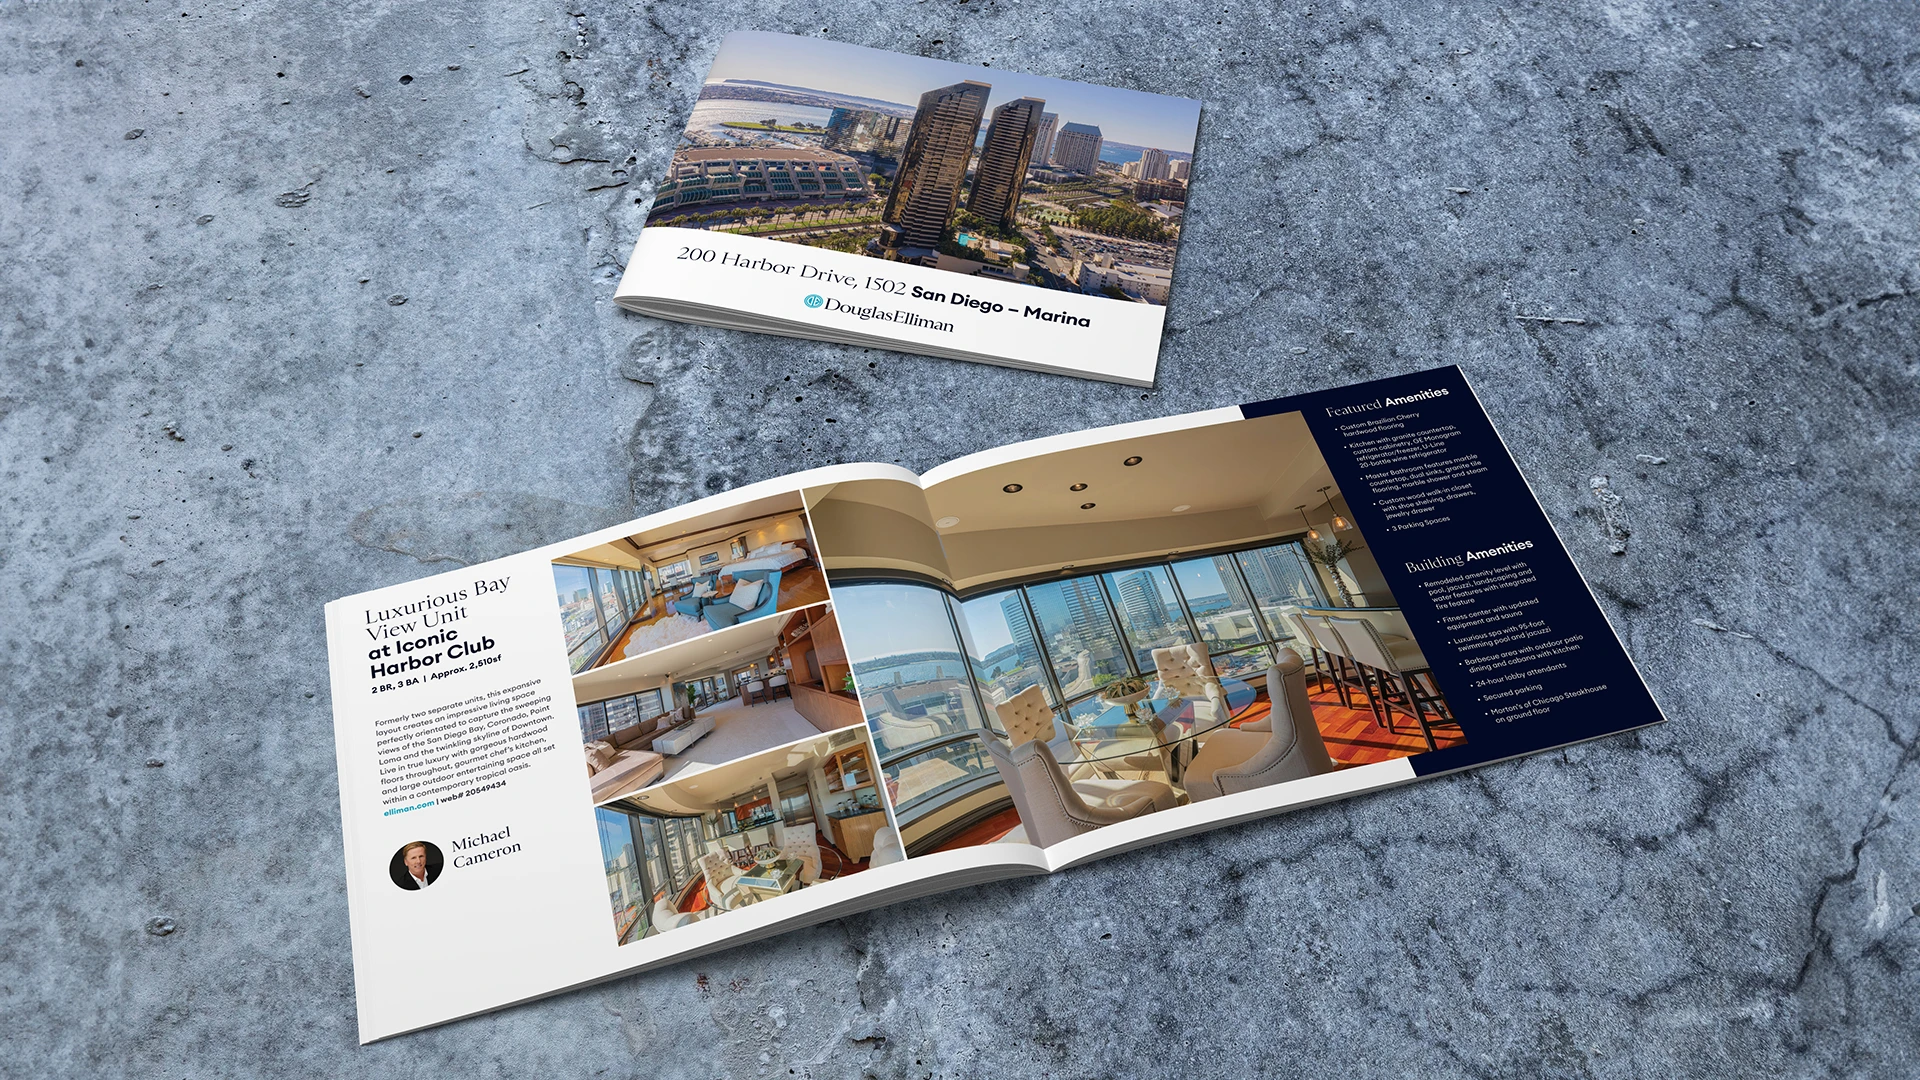 A mockup of a bifold brochure for a property in San Diego.